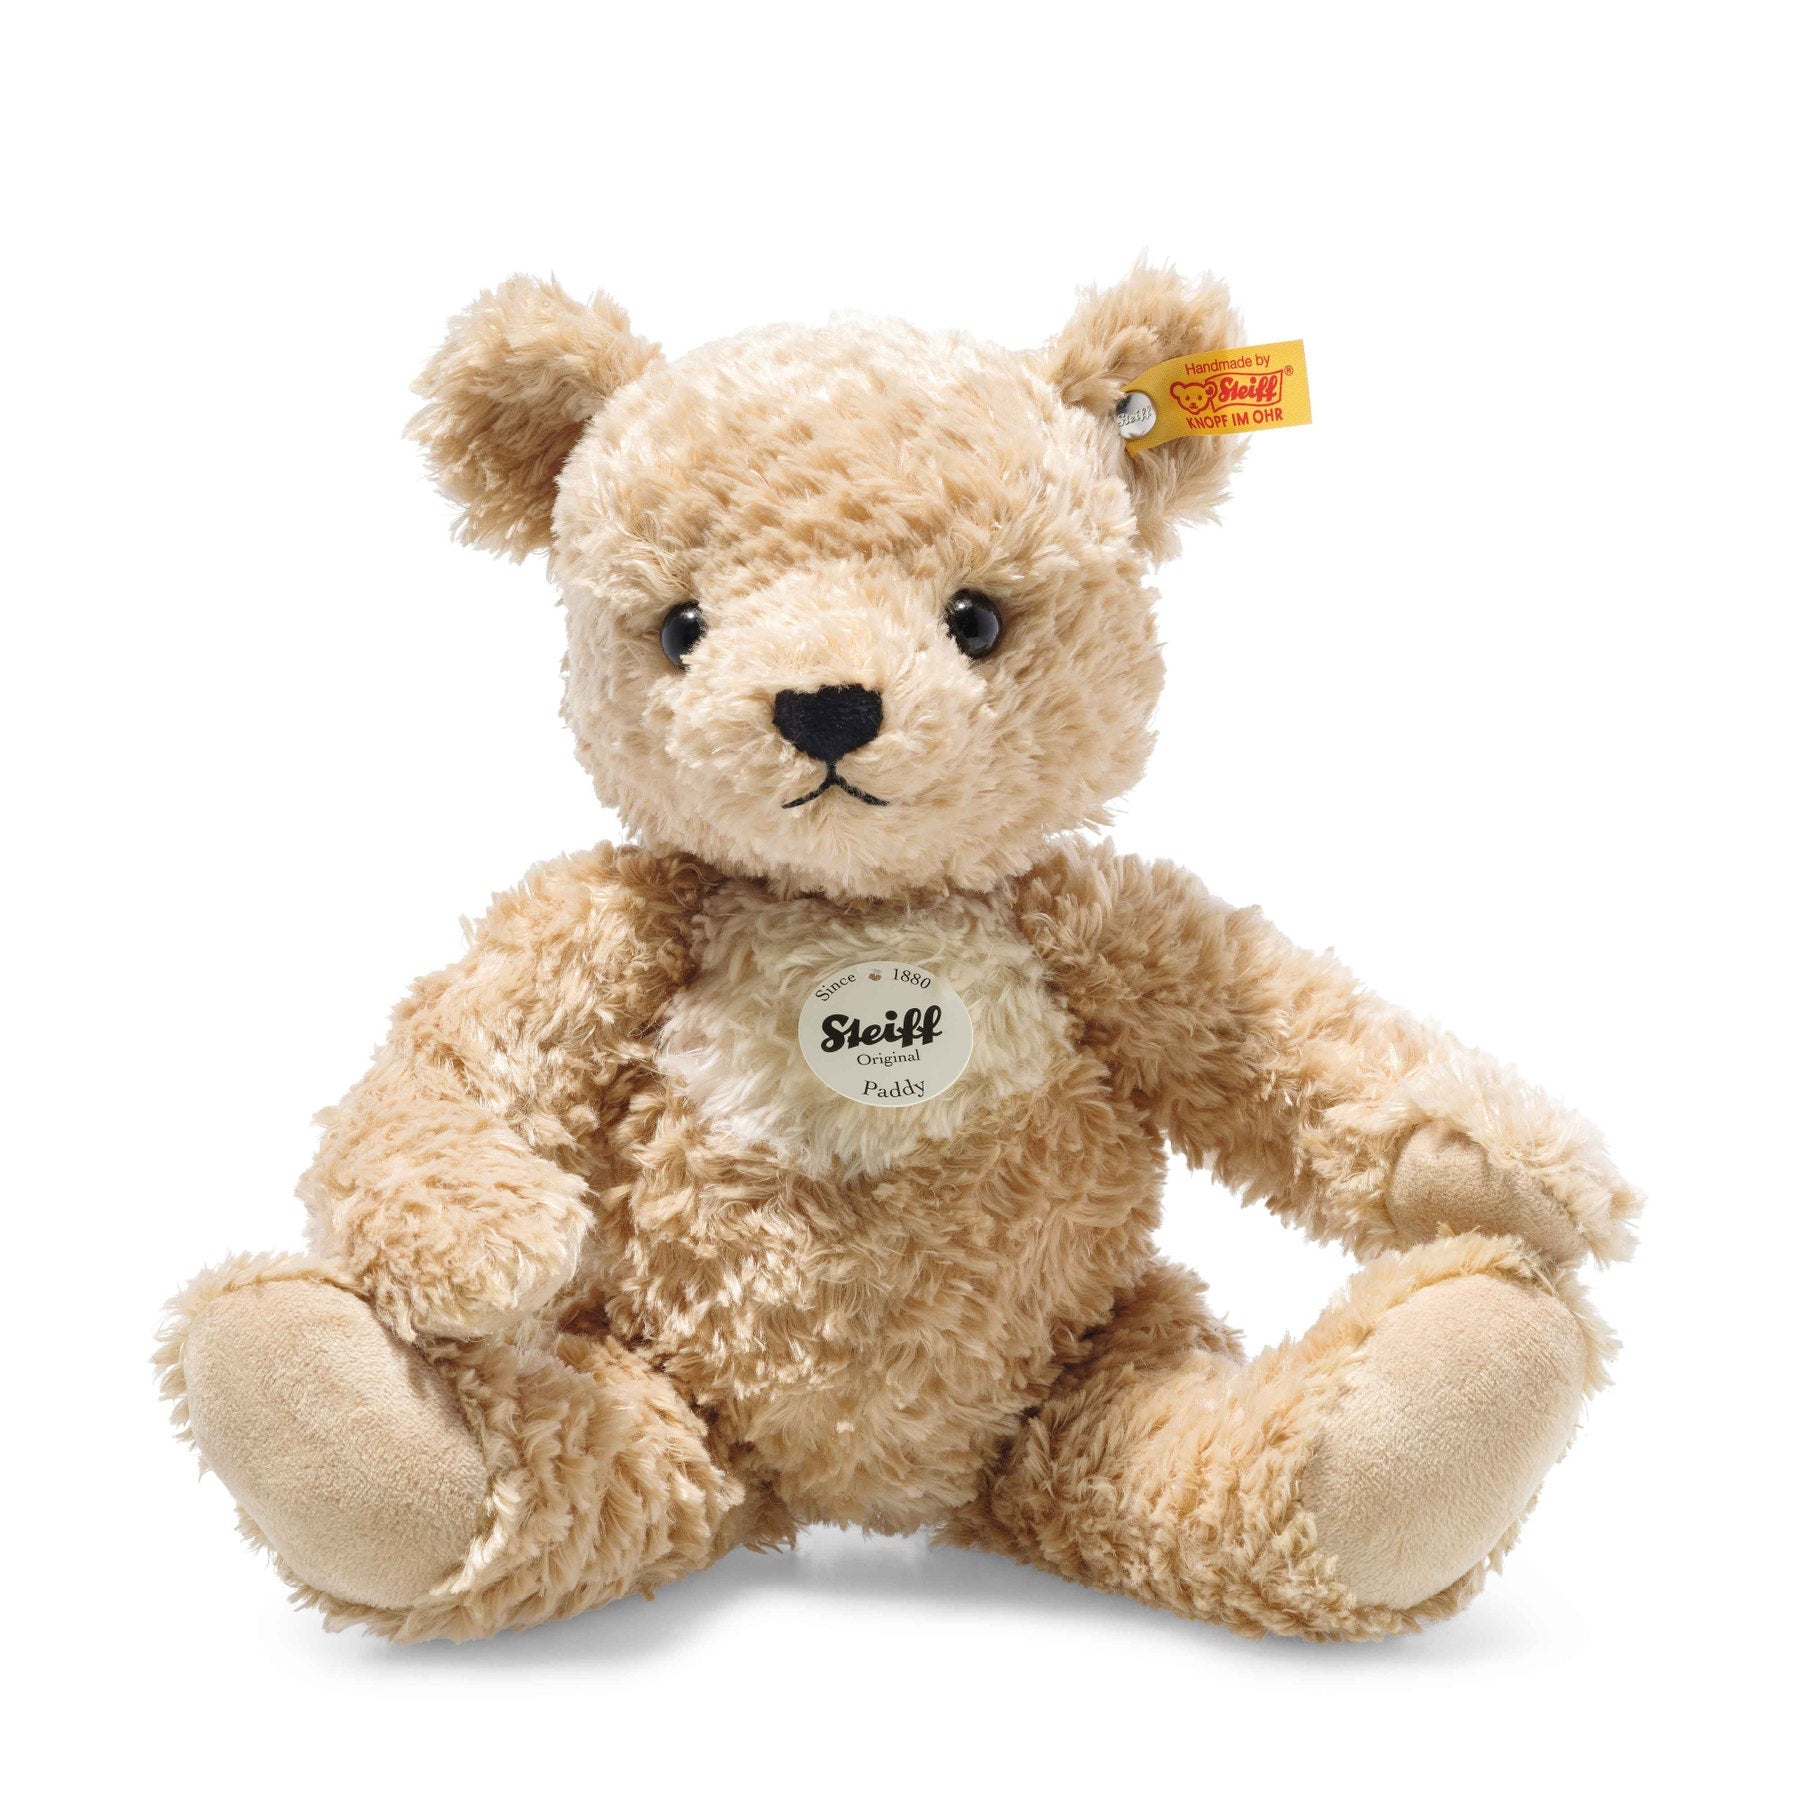 Steiff Bears, Soft Toys and Collectibles